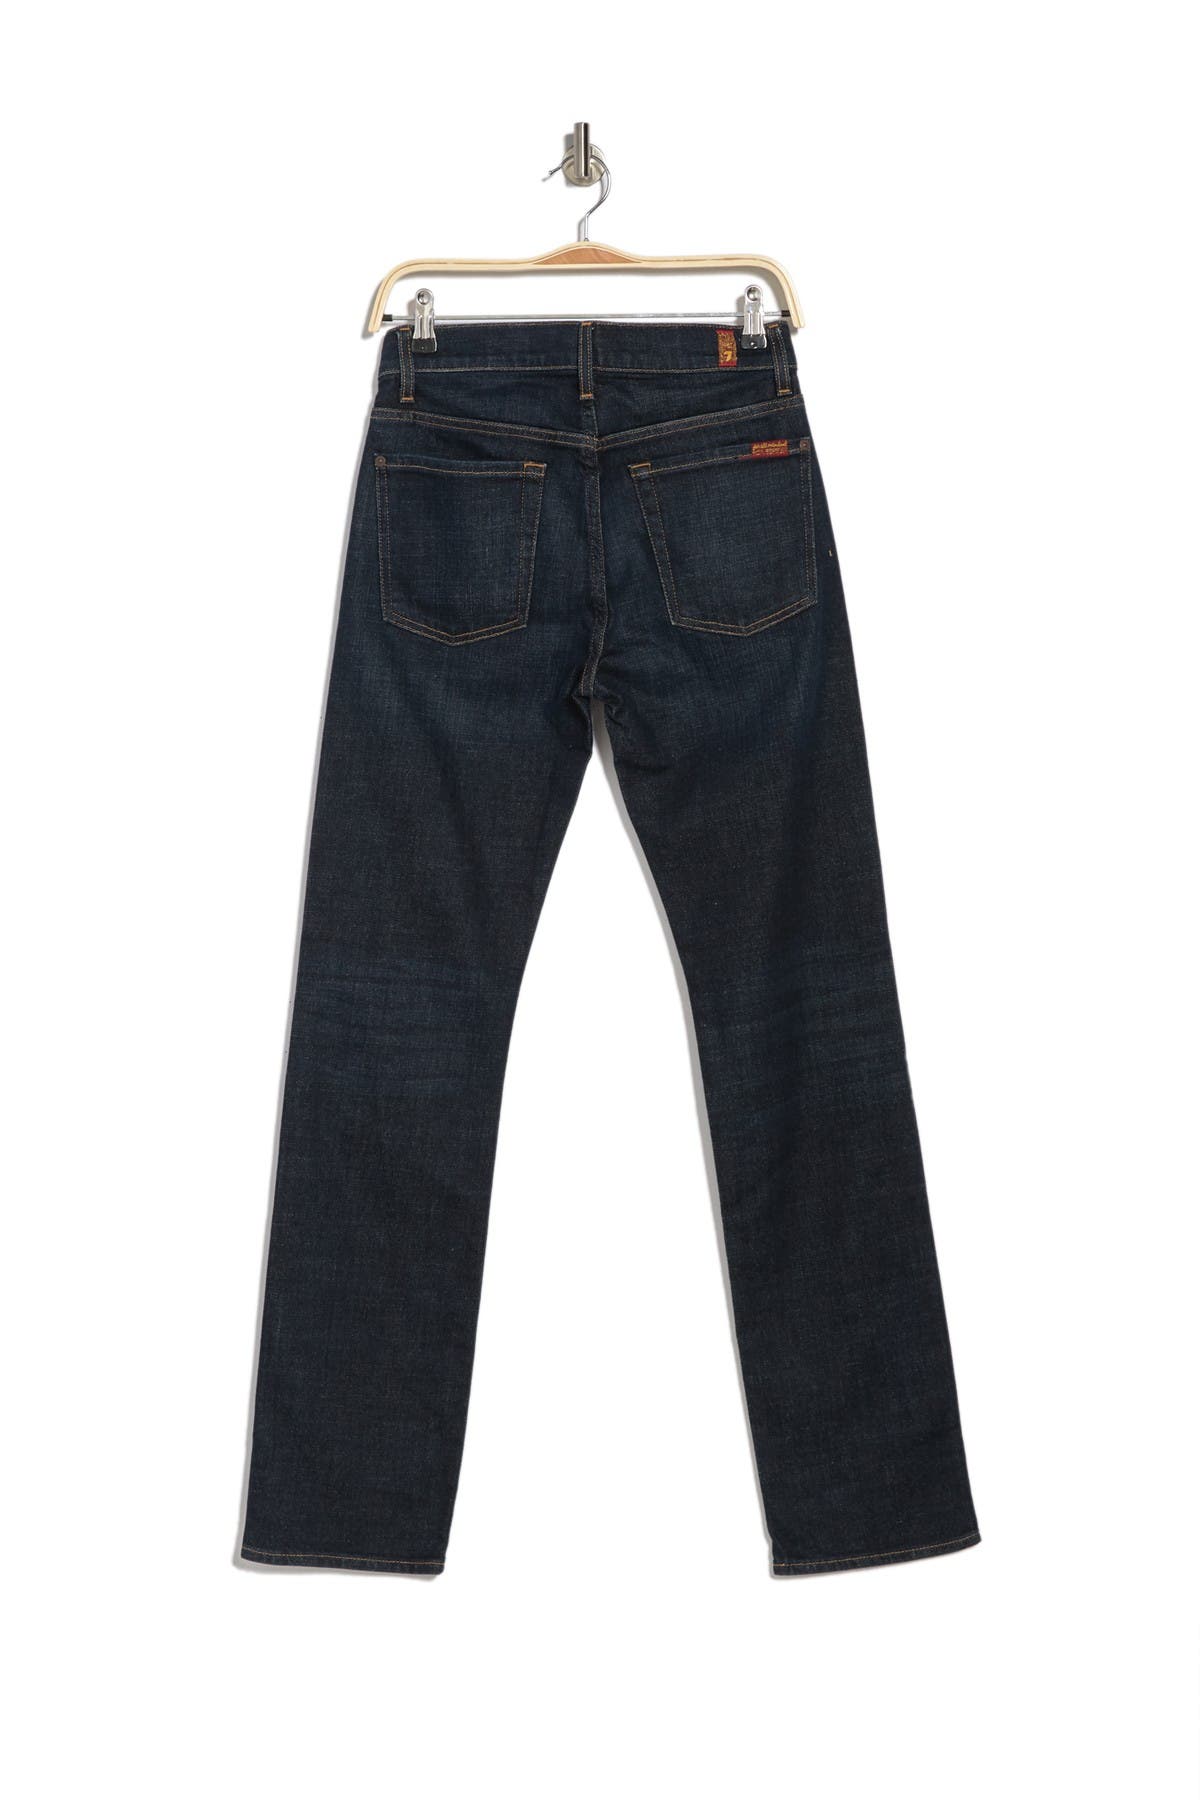 7 For All Mankind Slimmy Straight Leg Jeans In Dark Blue